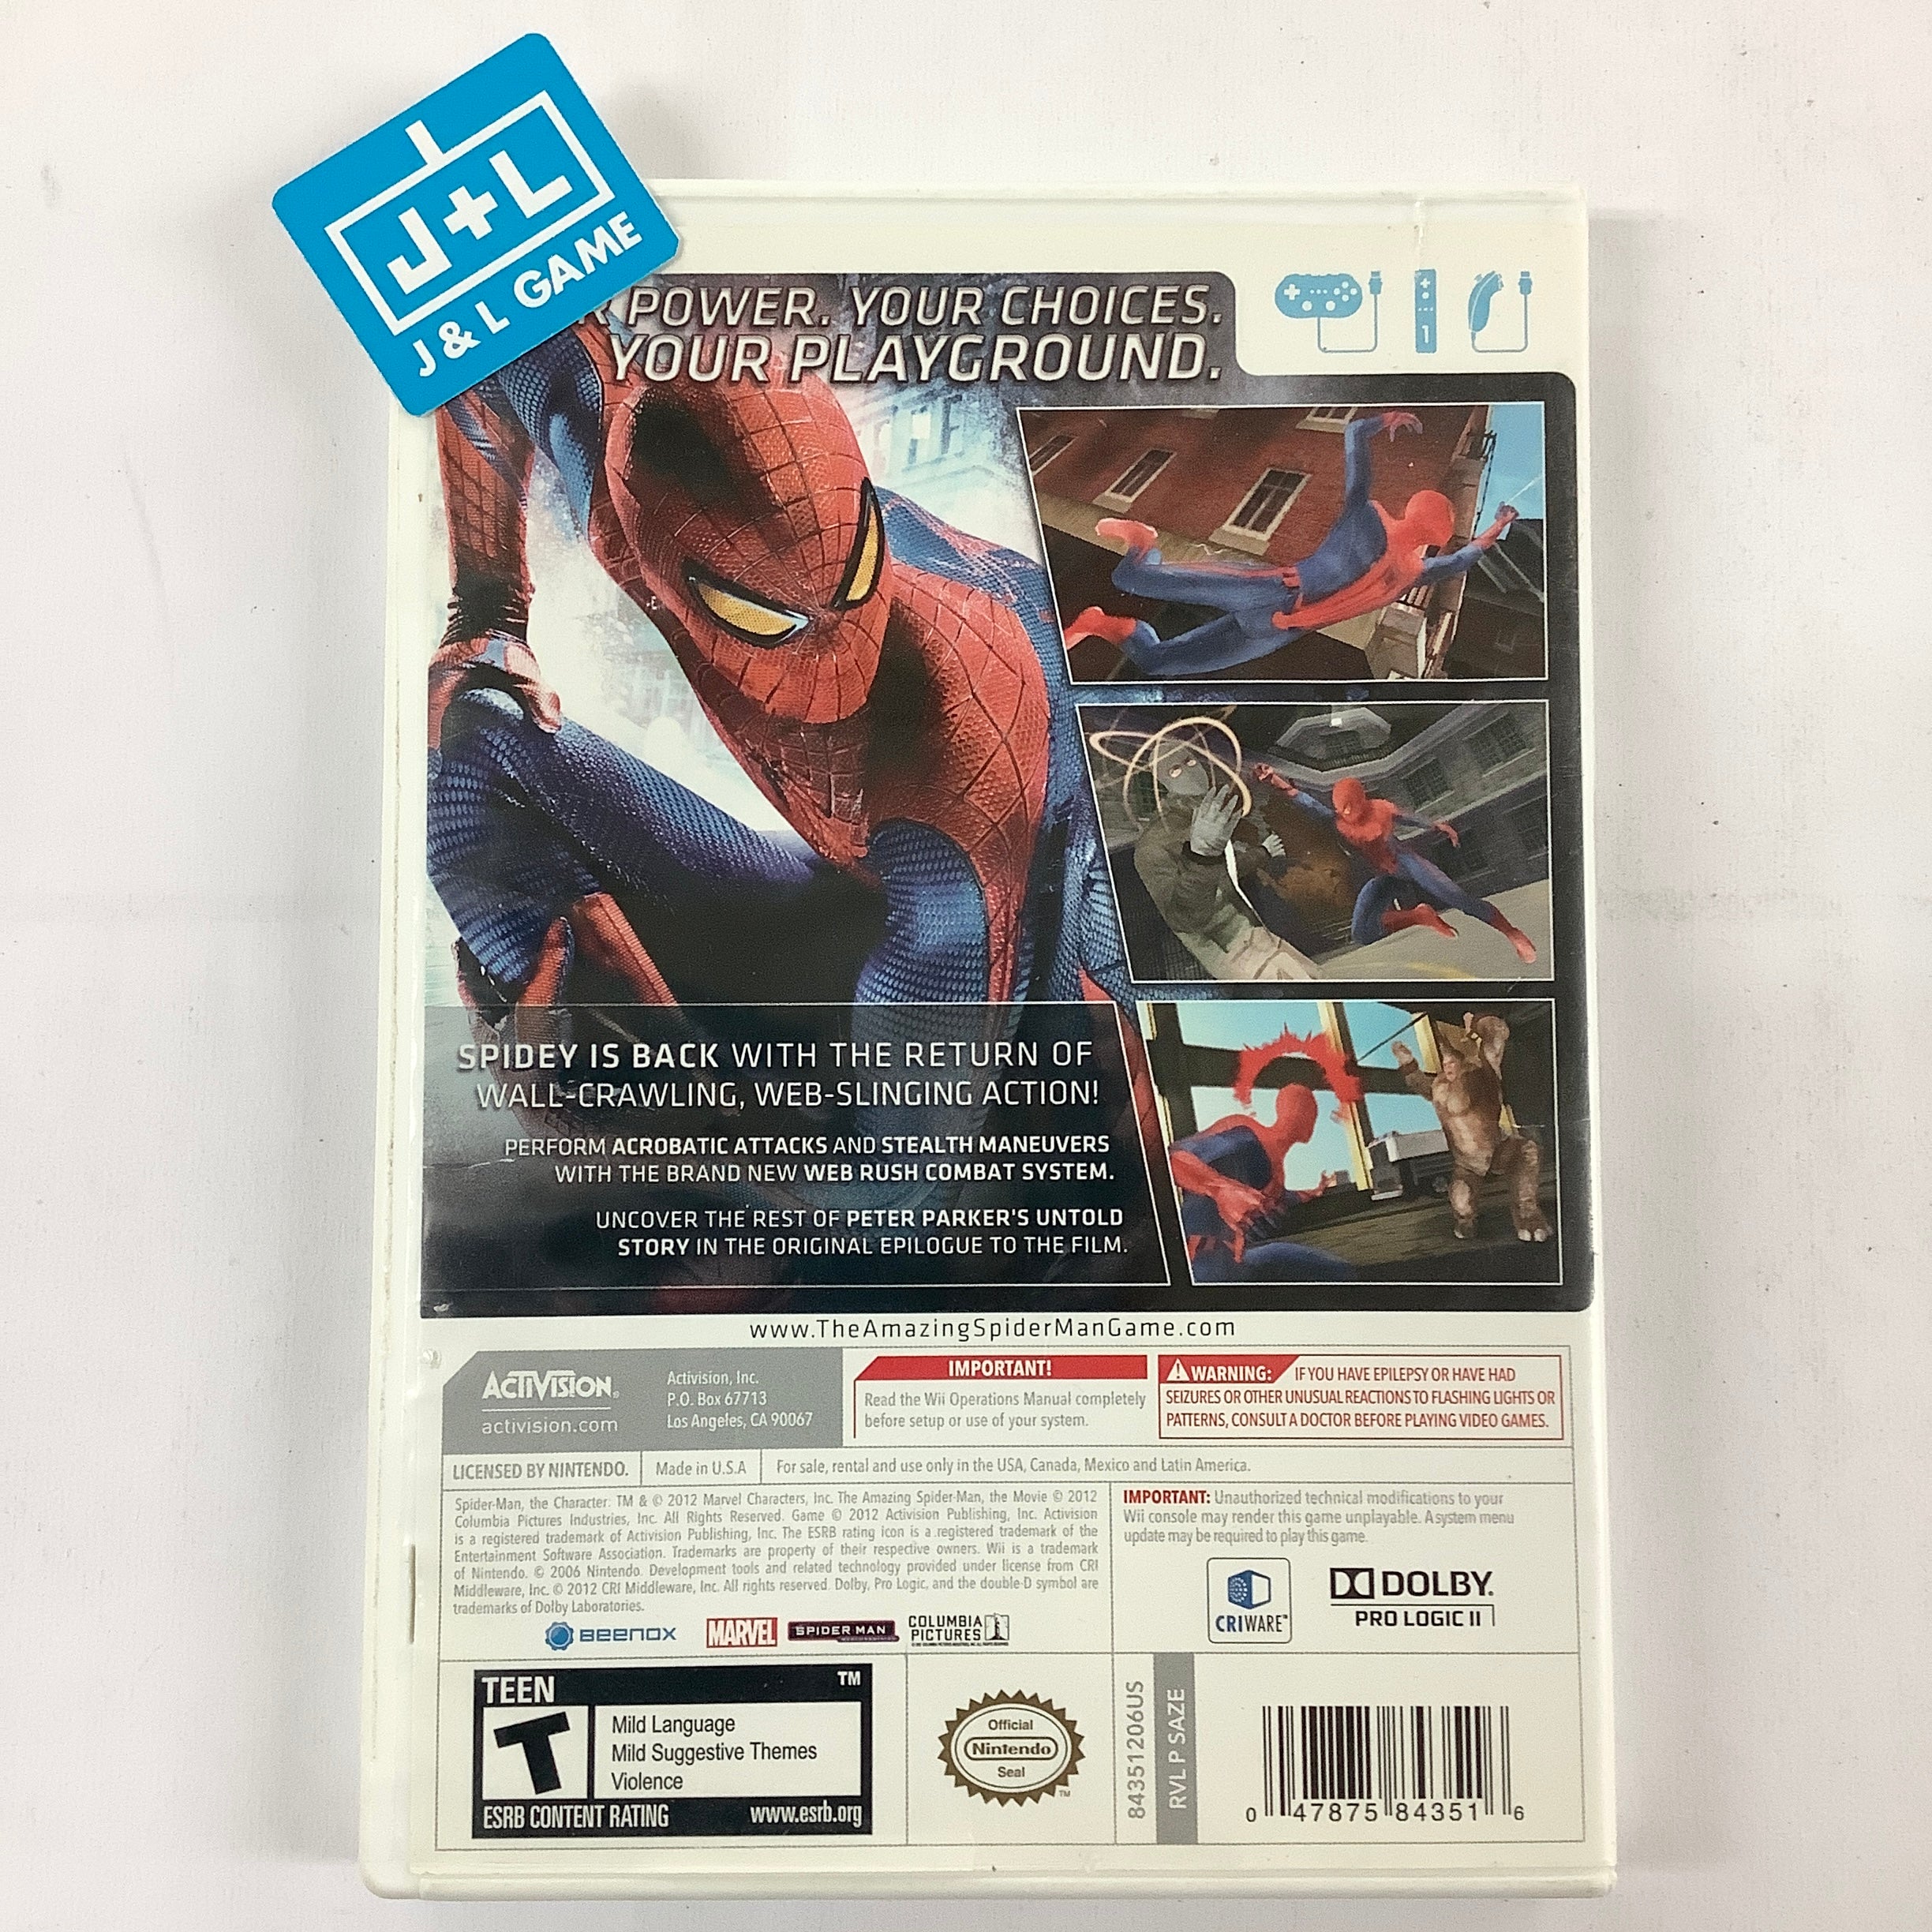 The Amazing Spider-Man - Nintendo Wii [Pre-Owned] Video Games Activision   